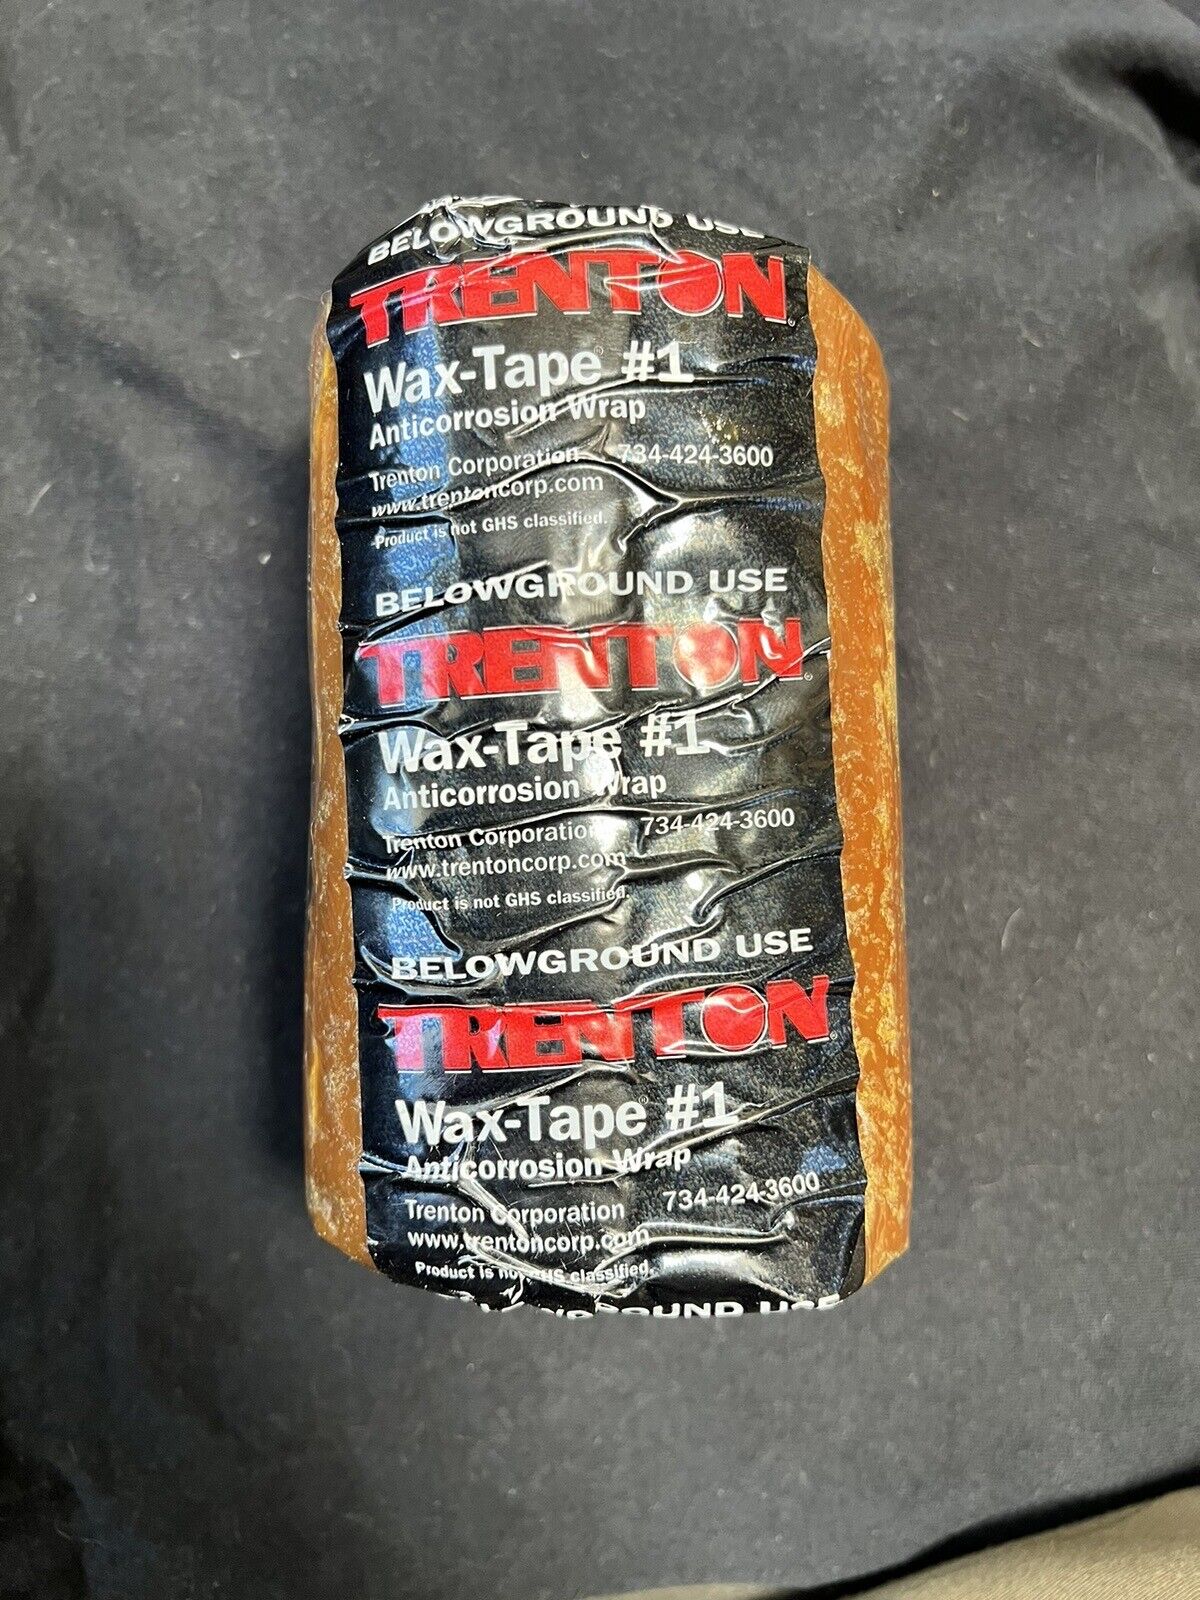 1 Roll of NEW TRENTON WAX-TAPE #1 Below Ground Anti-Corrosion Wrap New Old Stock